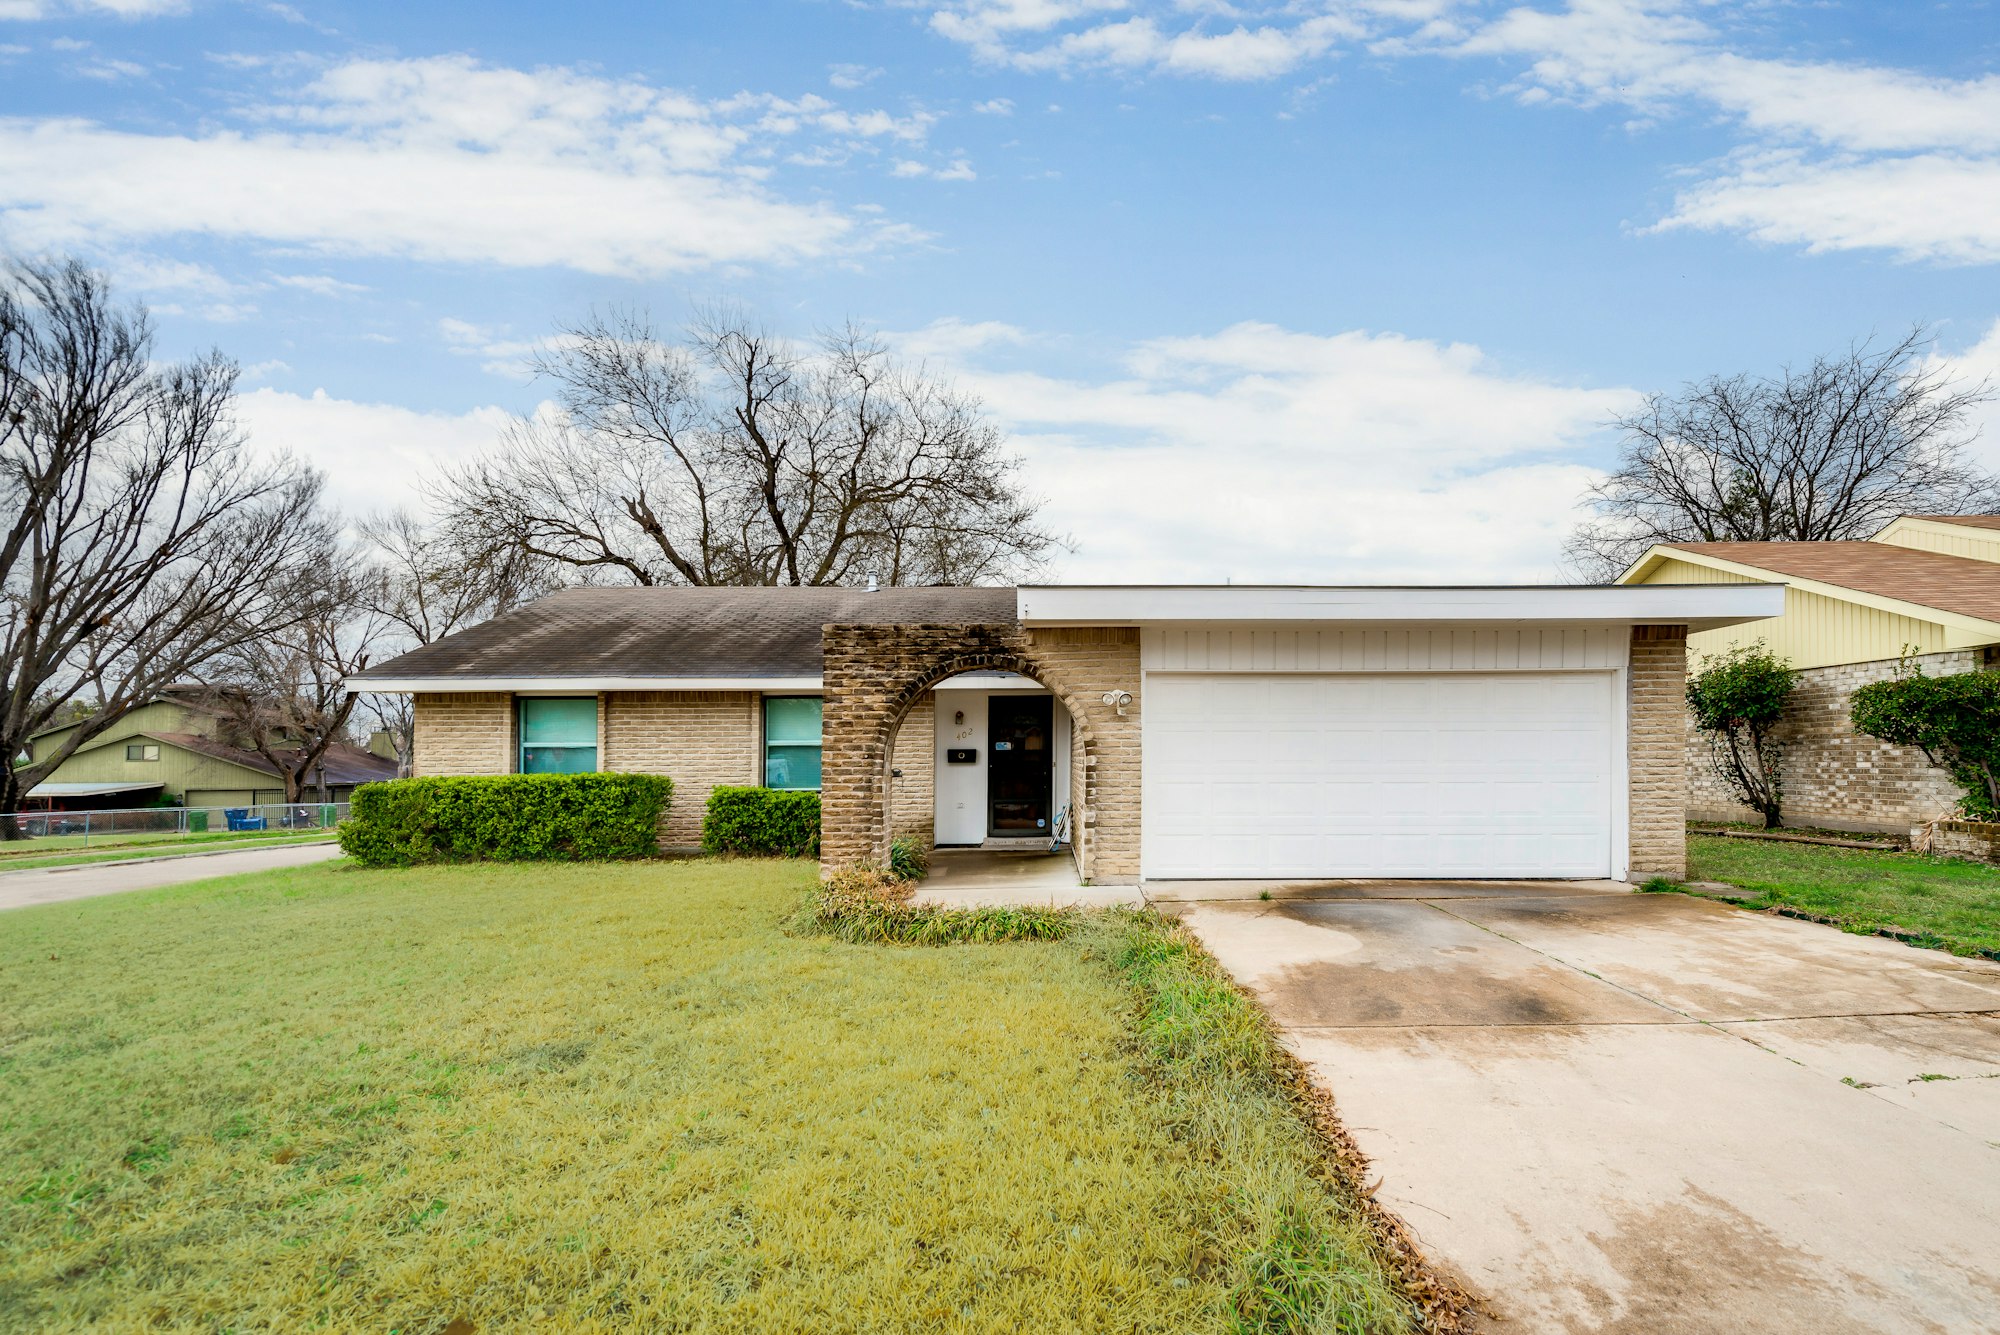 Photo 1 of 29 - 402 Meadowhill Dr, Garland, TX 75043